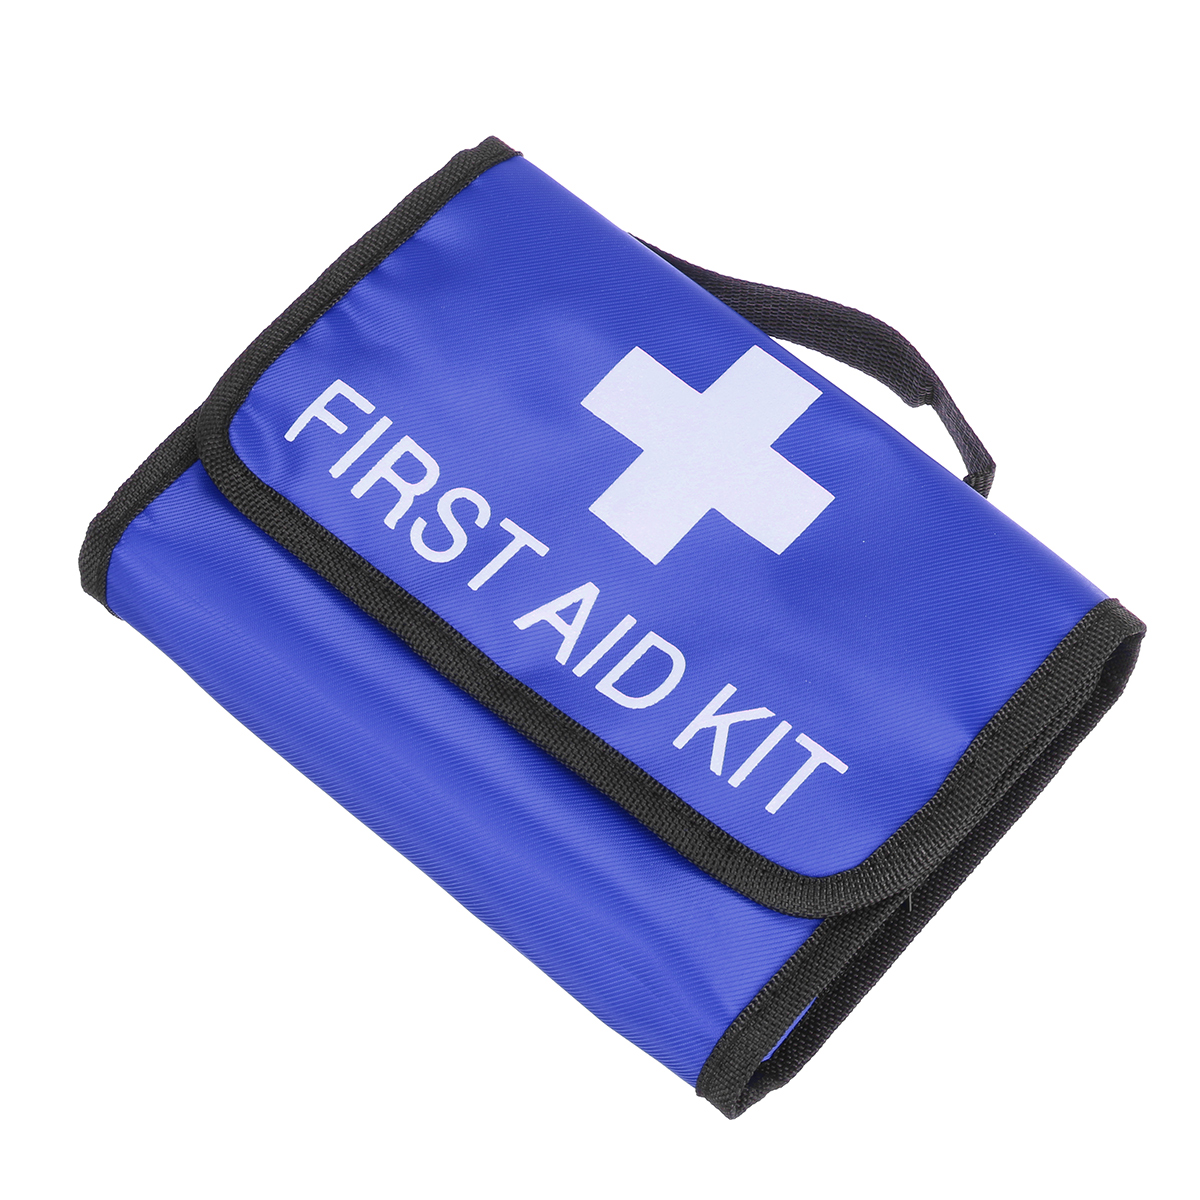 Outdoor-Portable-First-Aid-Kit-Medical-Storage-Bag-Waterproof-Car-Carrying-Household-Emergency-Kit-T-1757235-6